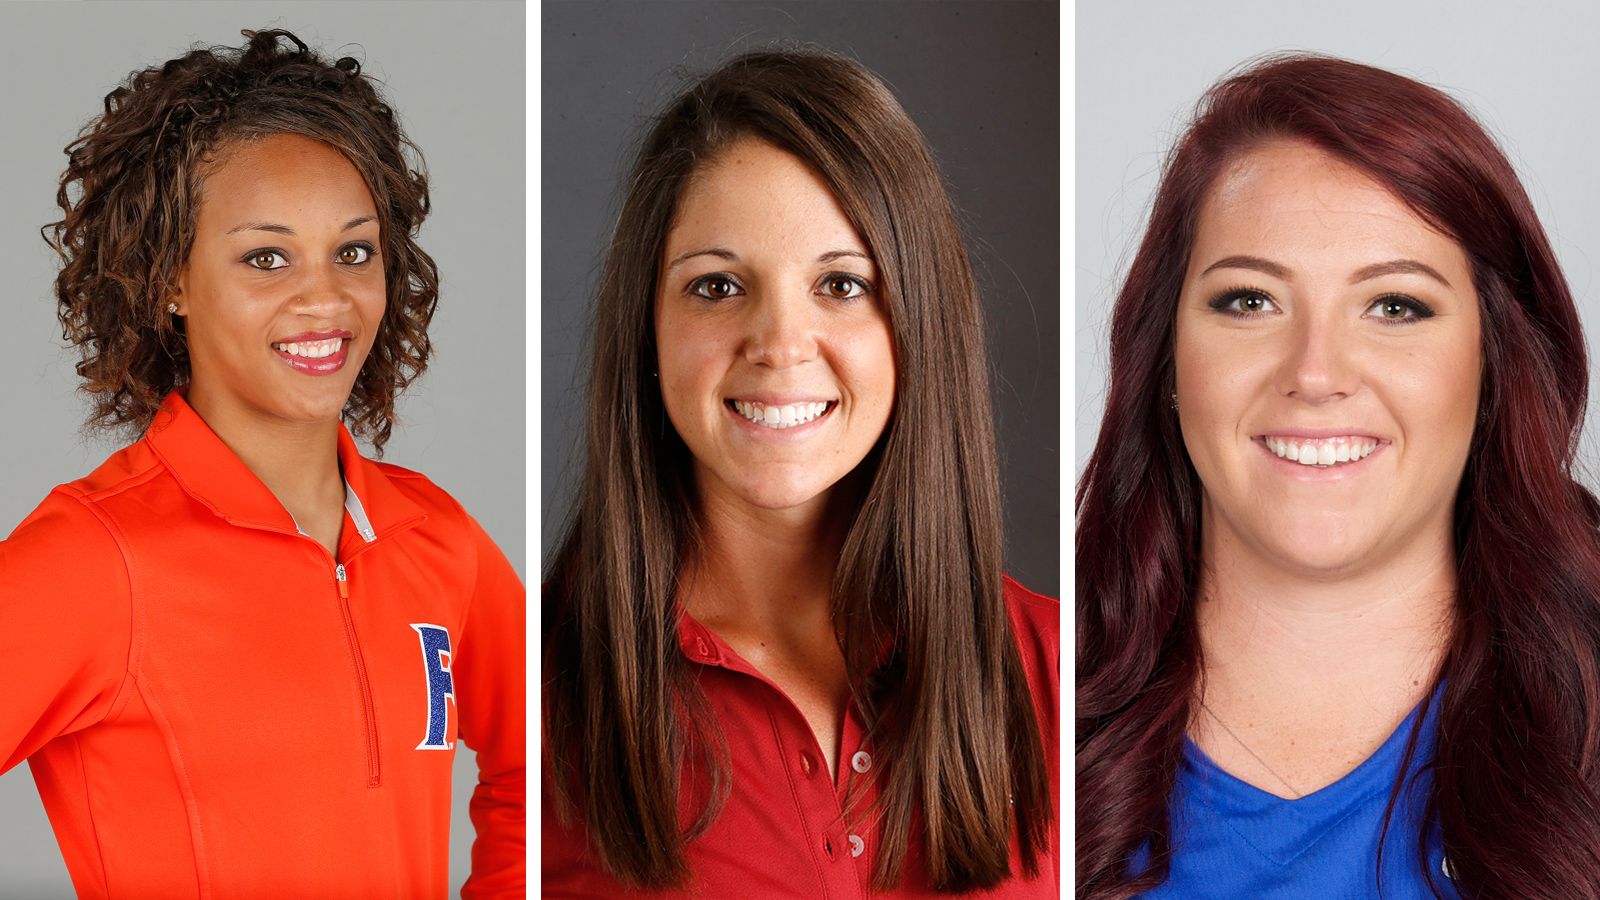 3 SEC finalists for Woman Athlete of the Year